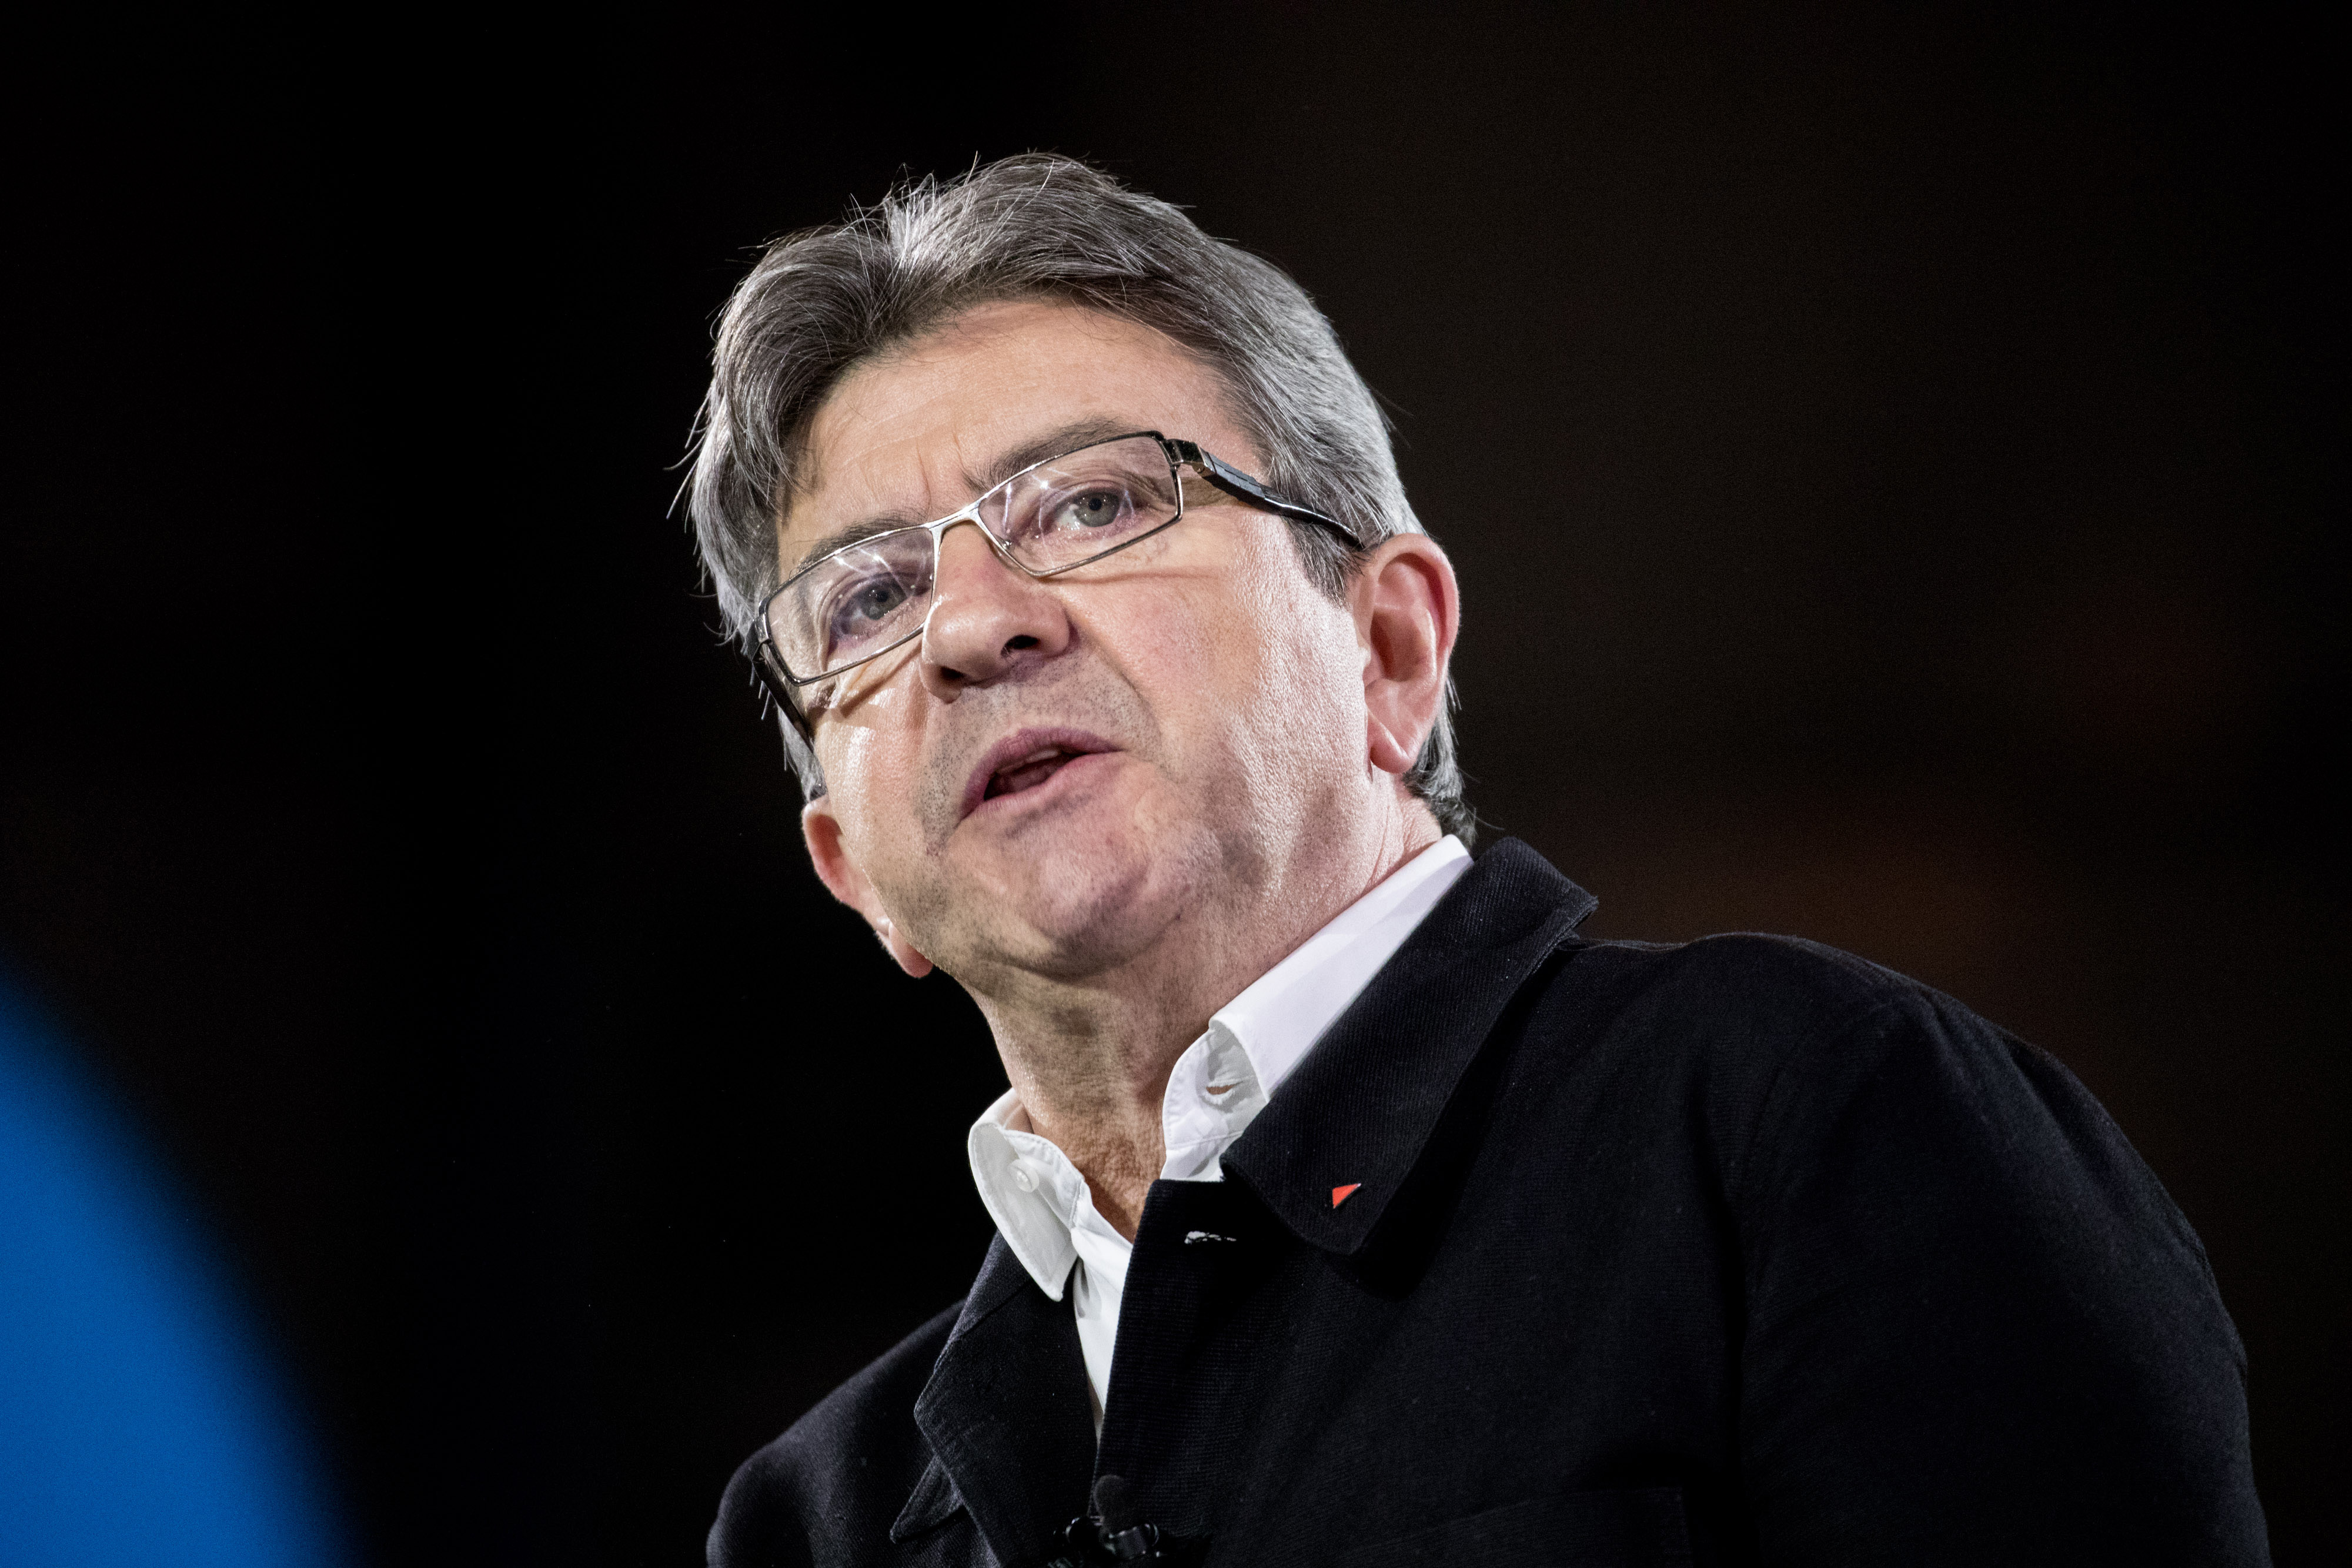 Jean-Luc Melenchon, France's presidential candidate, speaks during an election campaign event in Lille, France, on Wednesday, April 12, 2017. (Christophe Morin—Bloomberg — Getty Images)